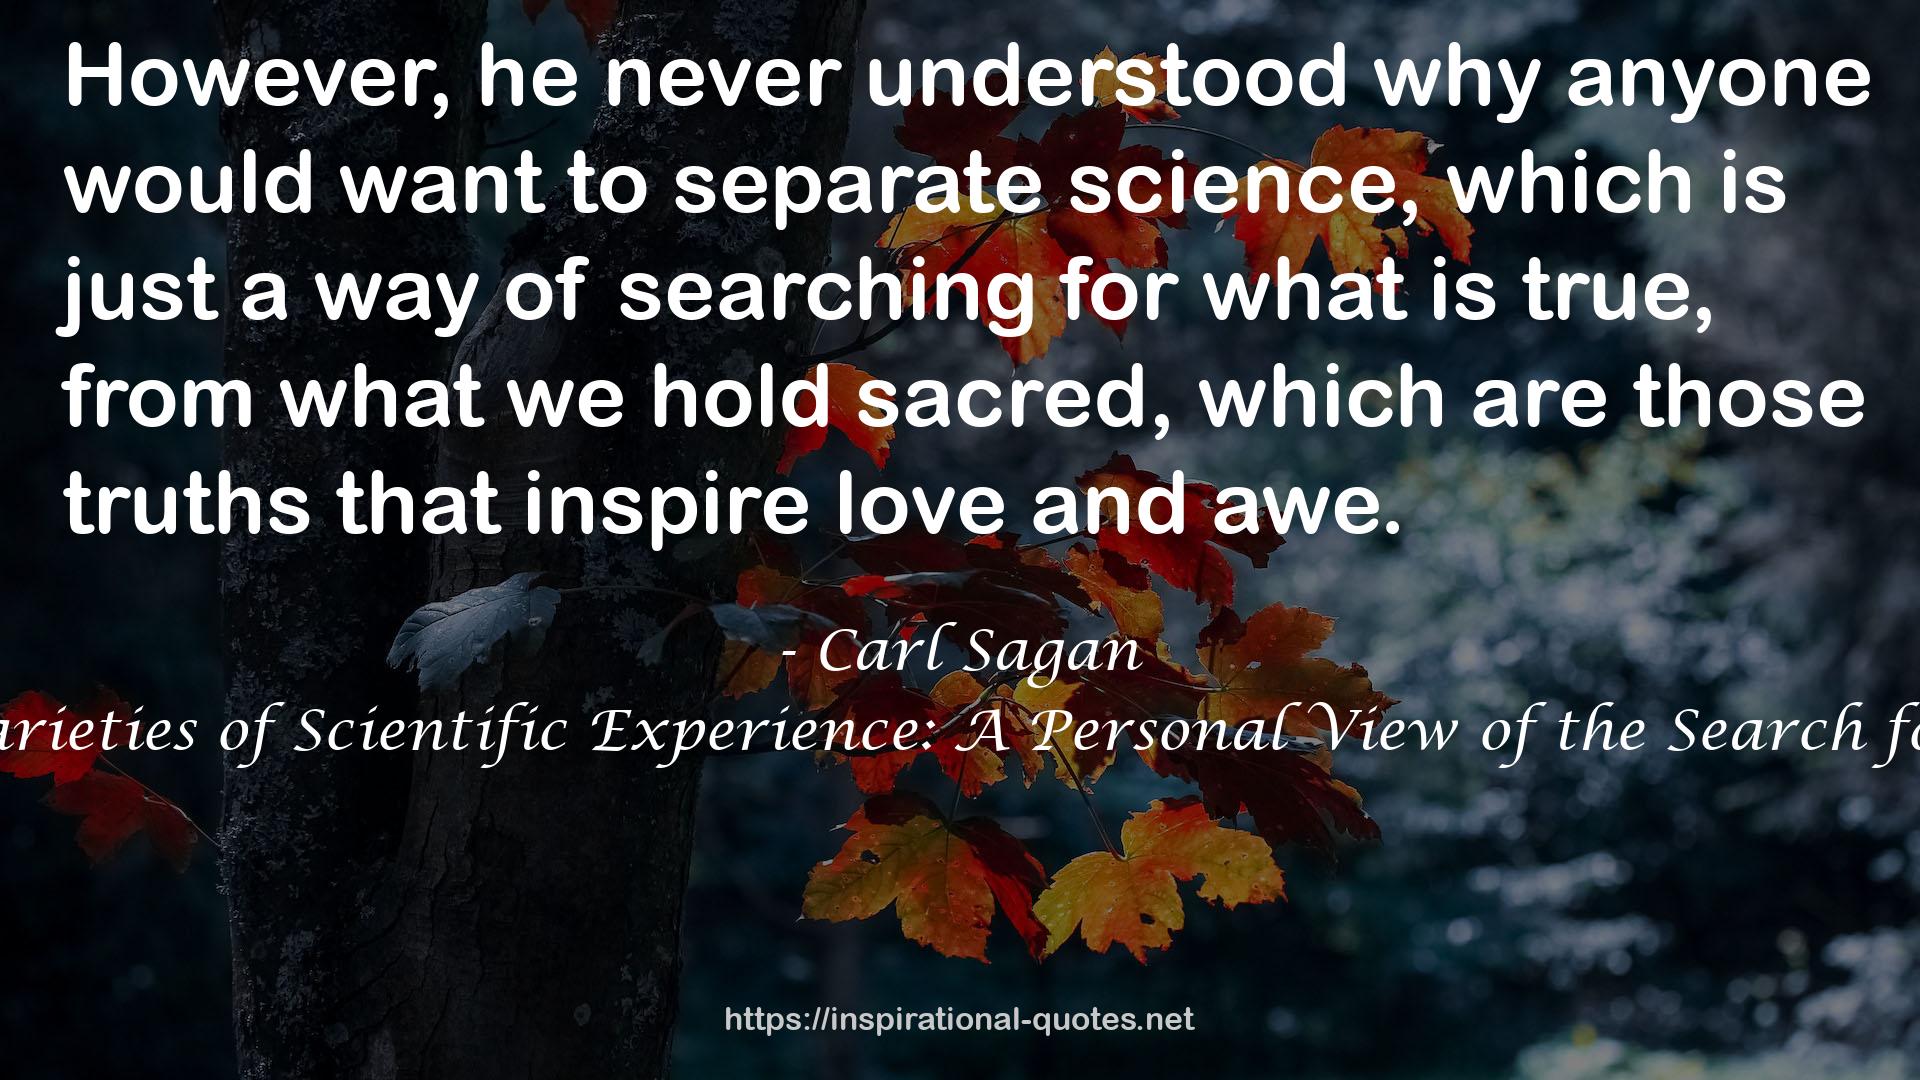 The Varieties of Scientific Experience: A Personal View of the Search for God QUOTES